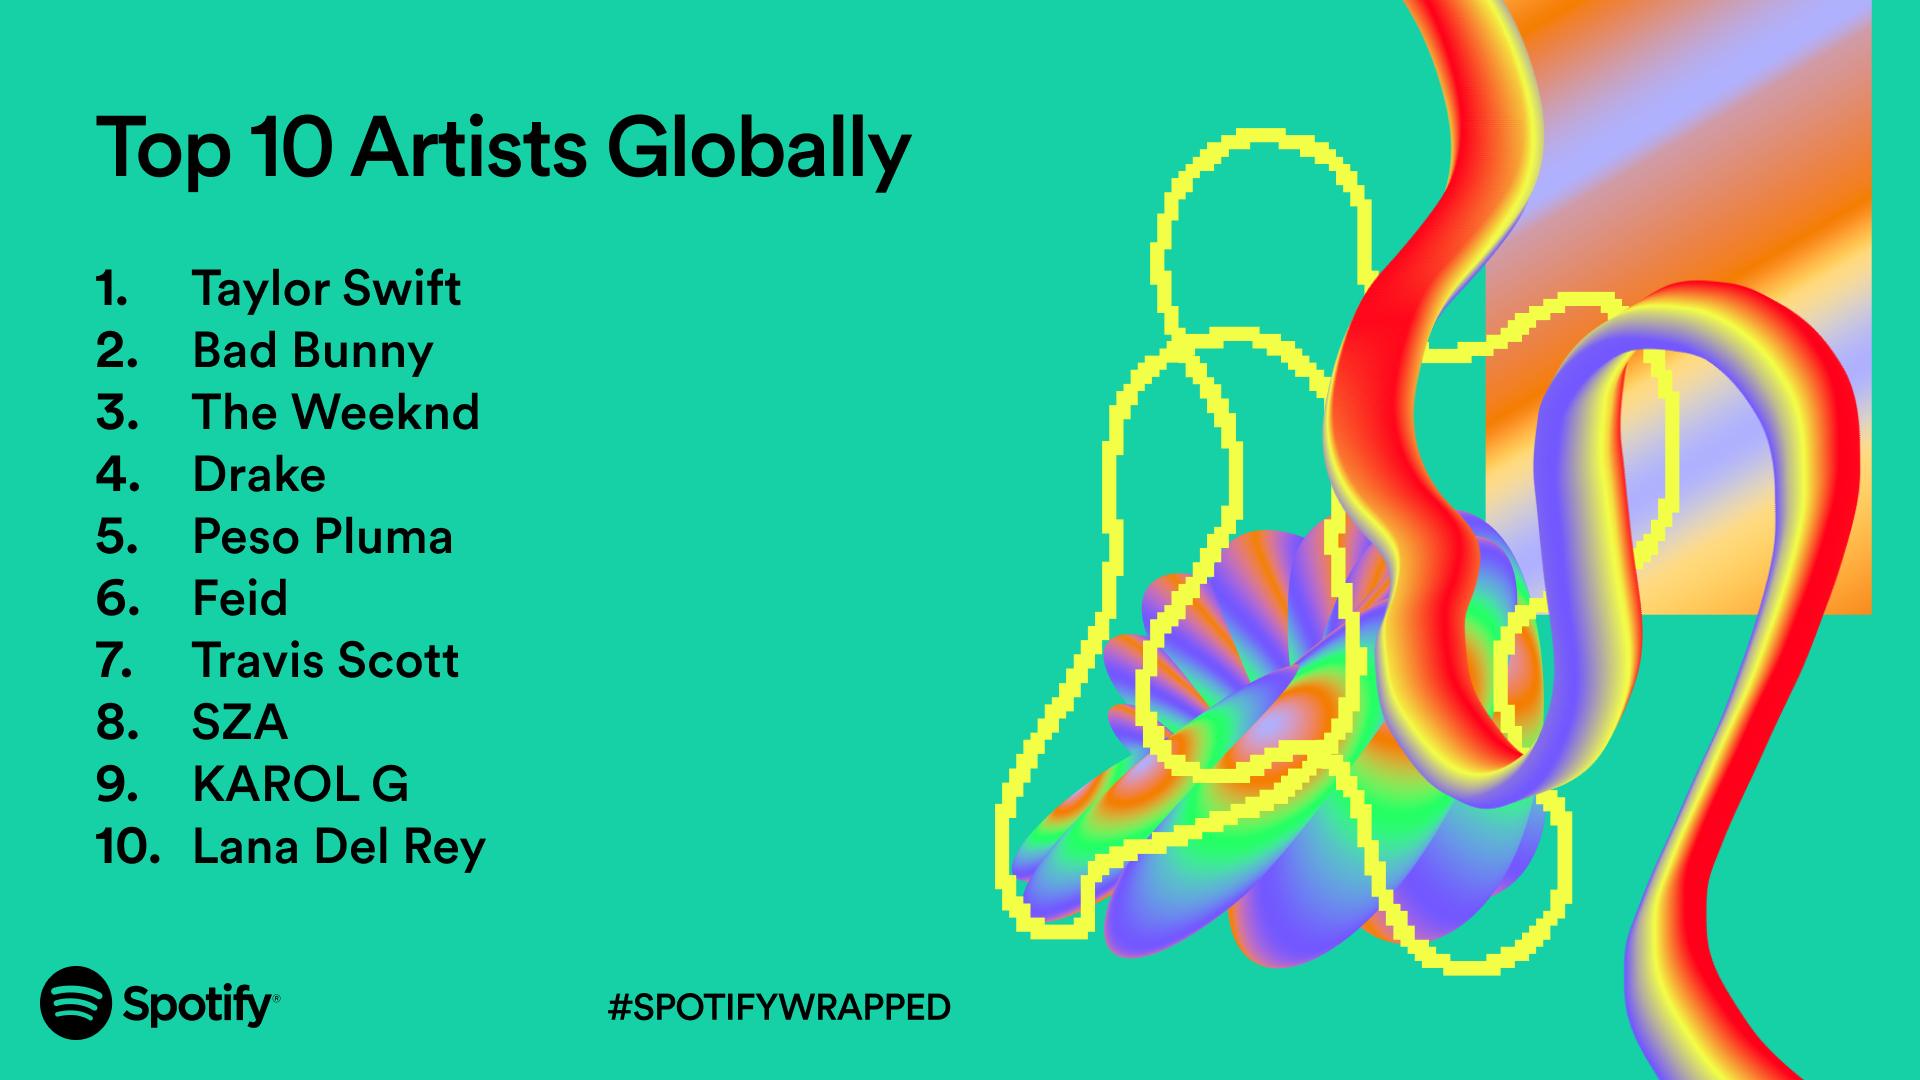 Spotify most listened to artist